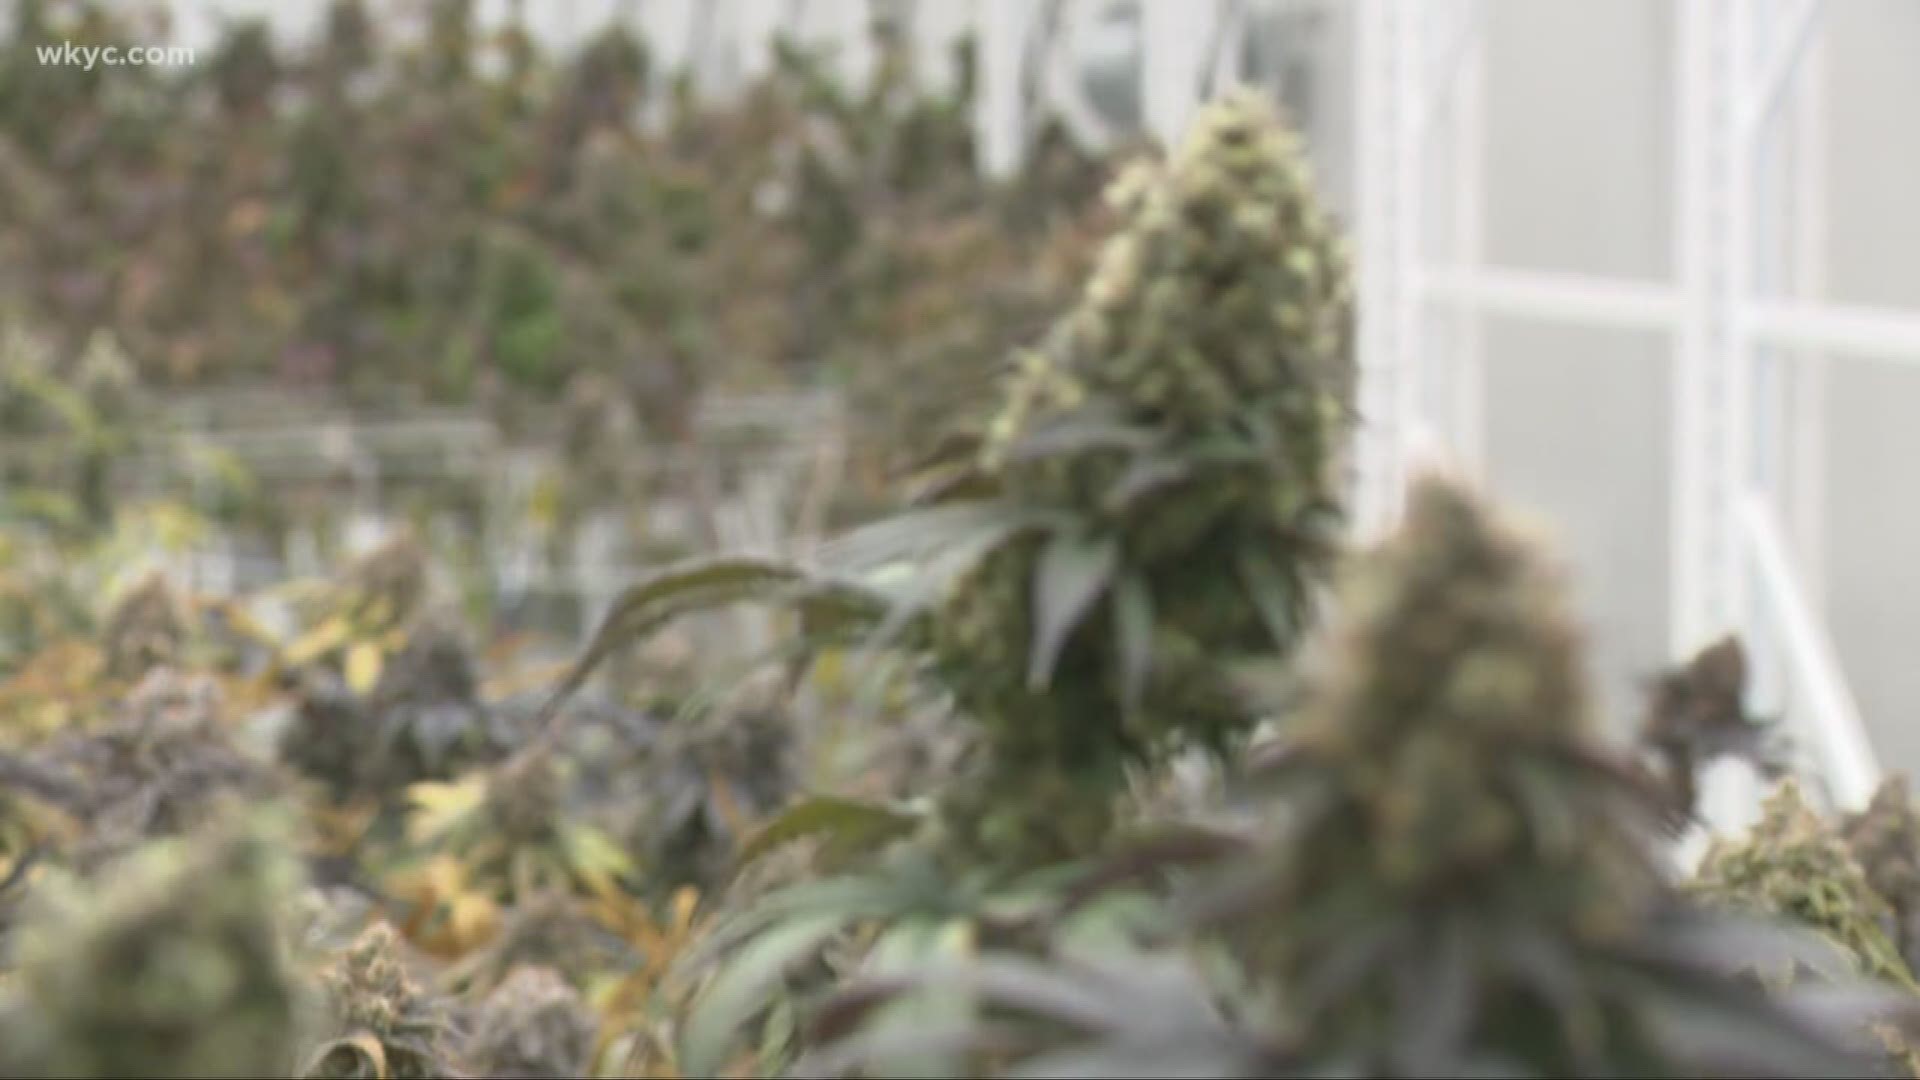 The ordinance eliminates fines, jail time for possession of 7 ounces or less of marijuana. Marijuana is still illegal at the state and federal levels.